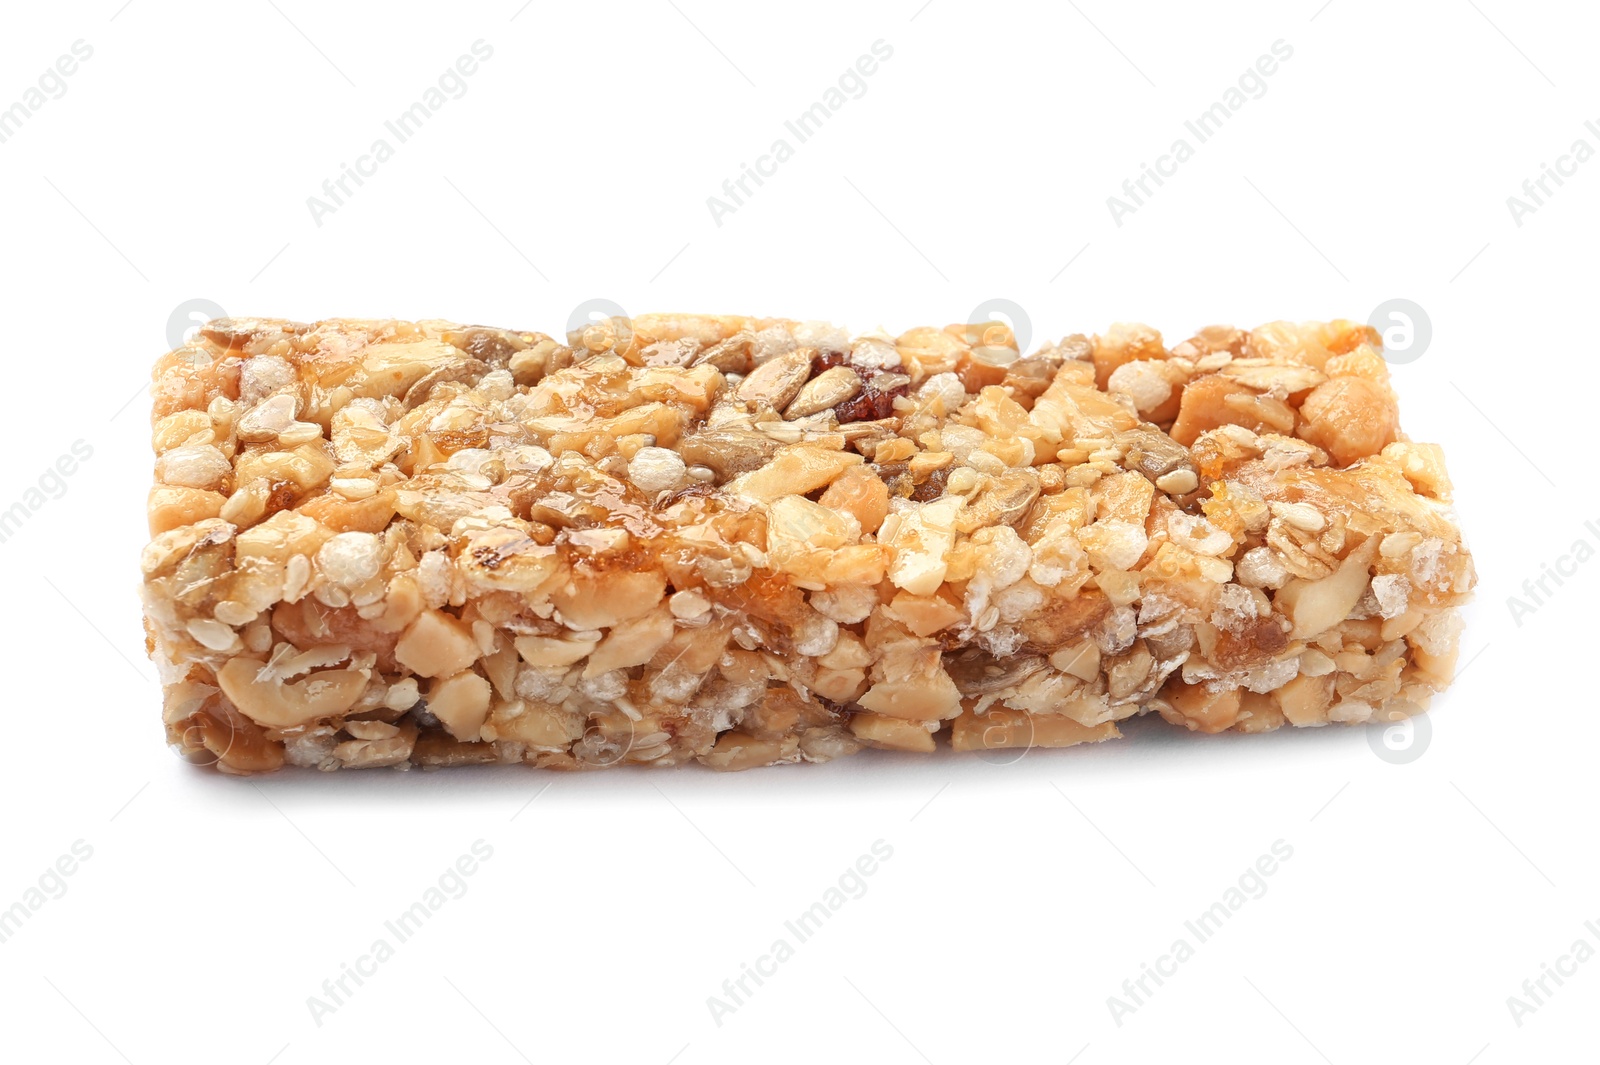 Photo of Grain cereal bar on white background. Healthy snack